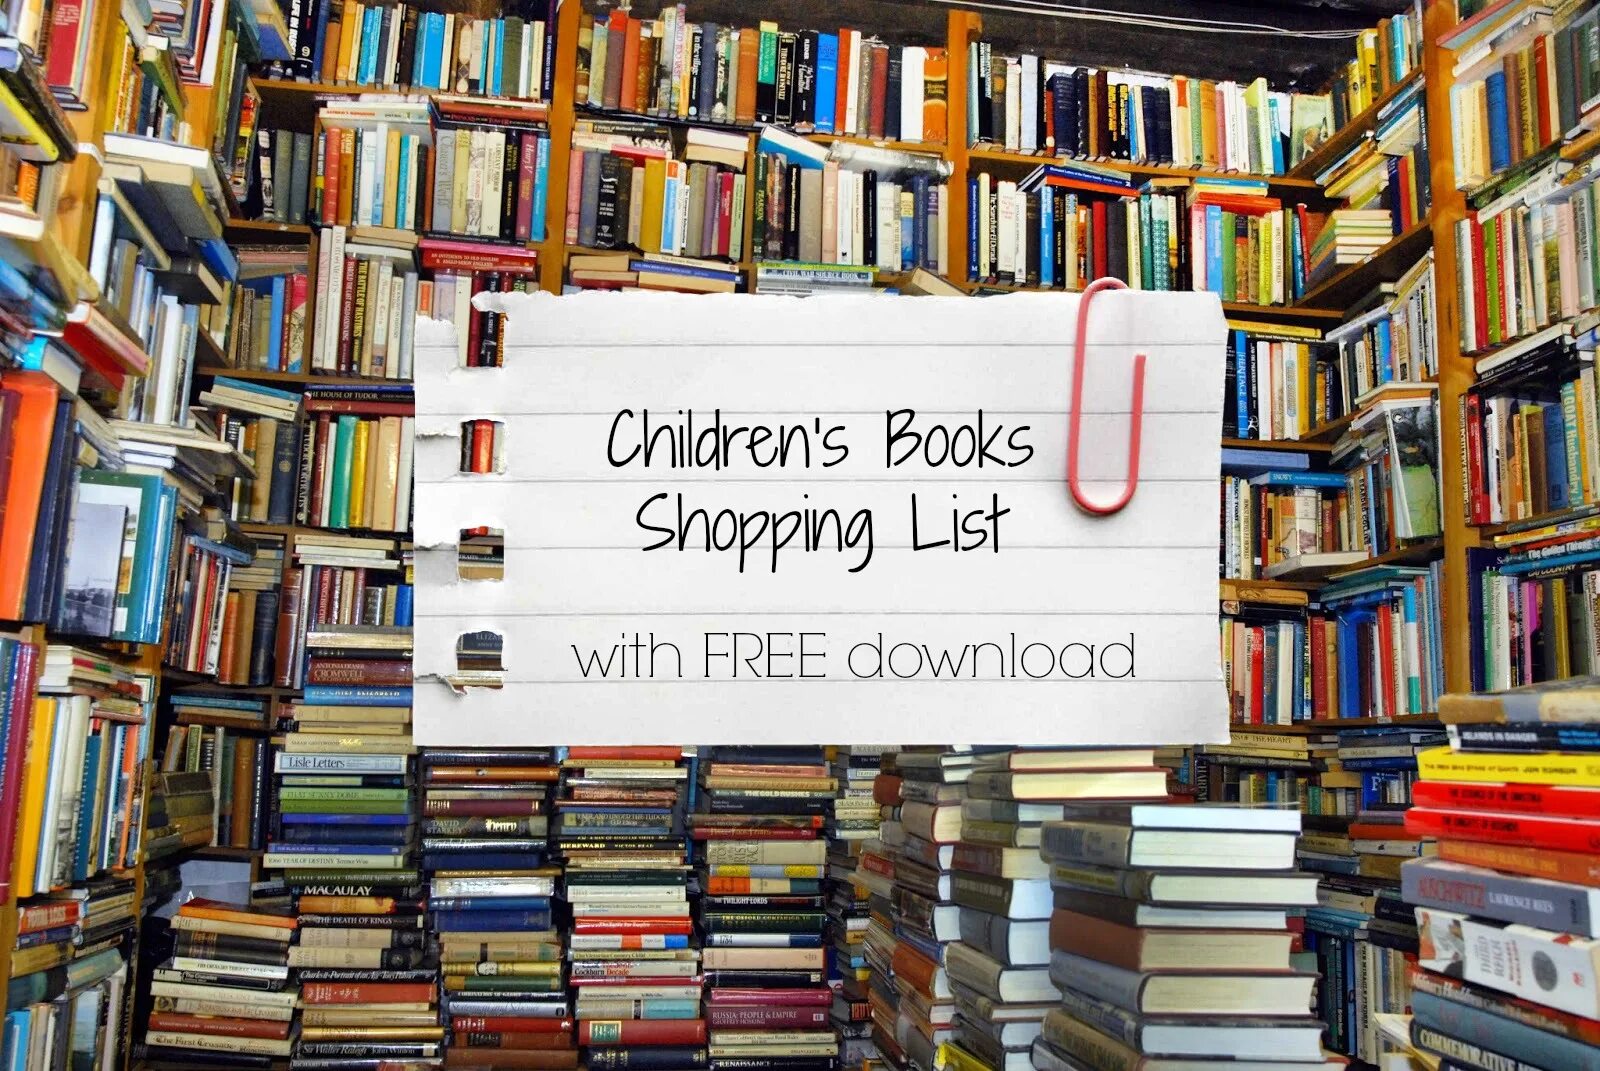 Find books like. The sales book. Books for children. Books for sale. Gif shop книга.